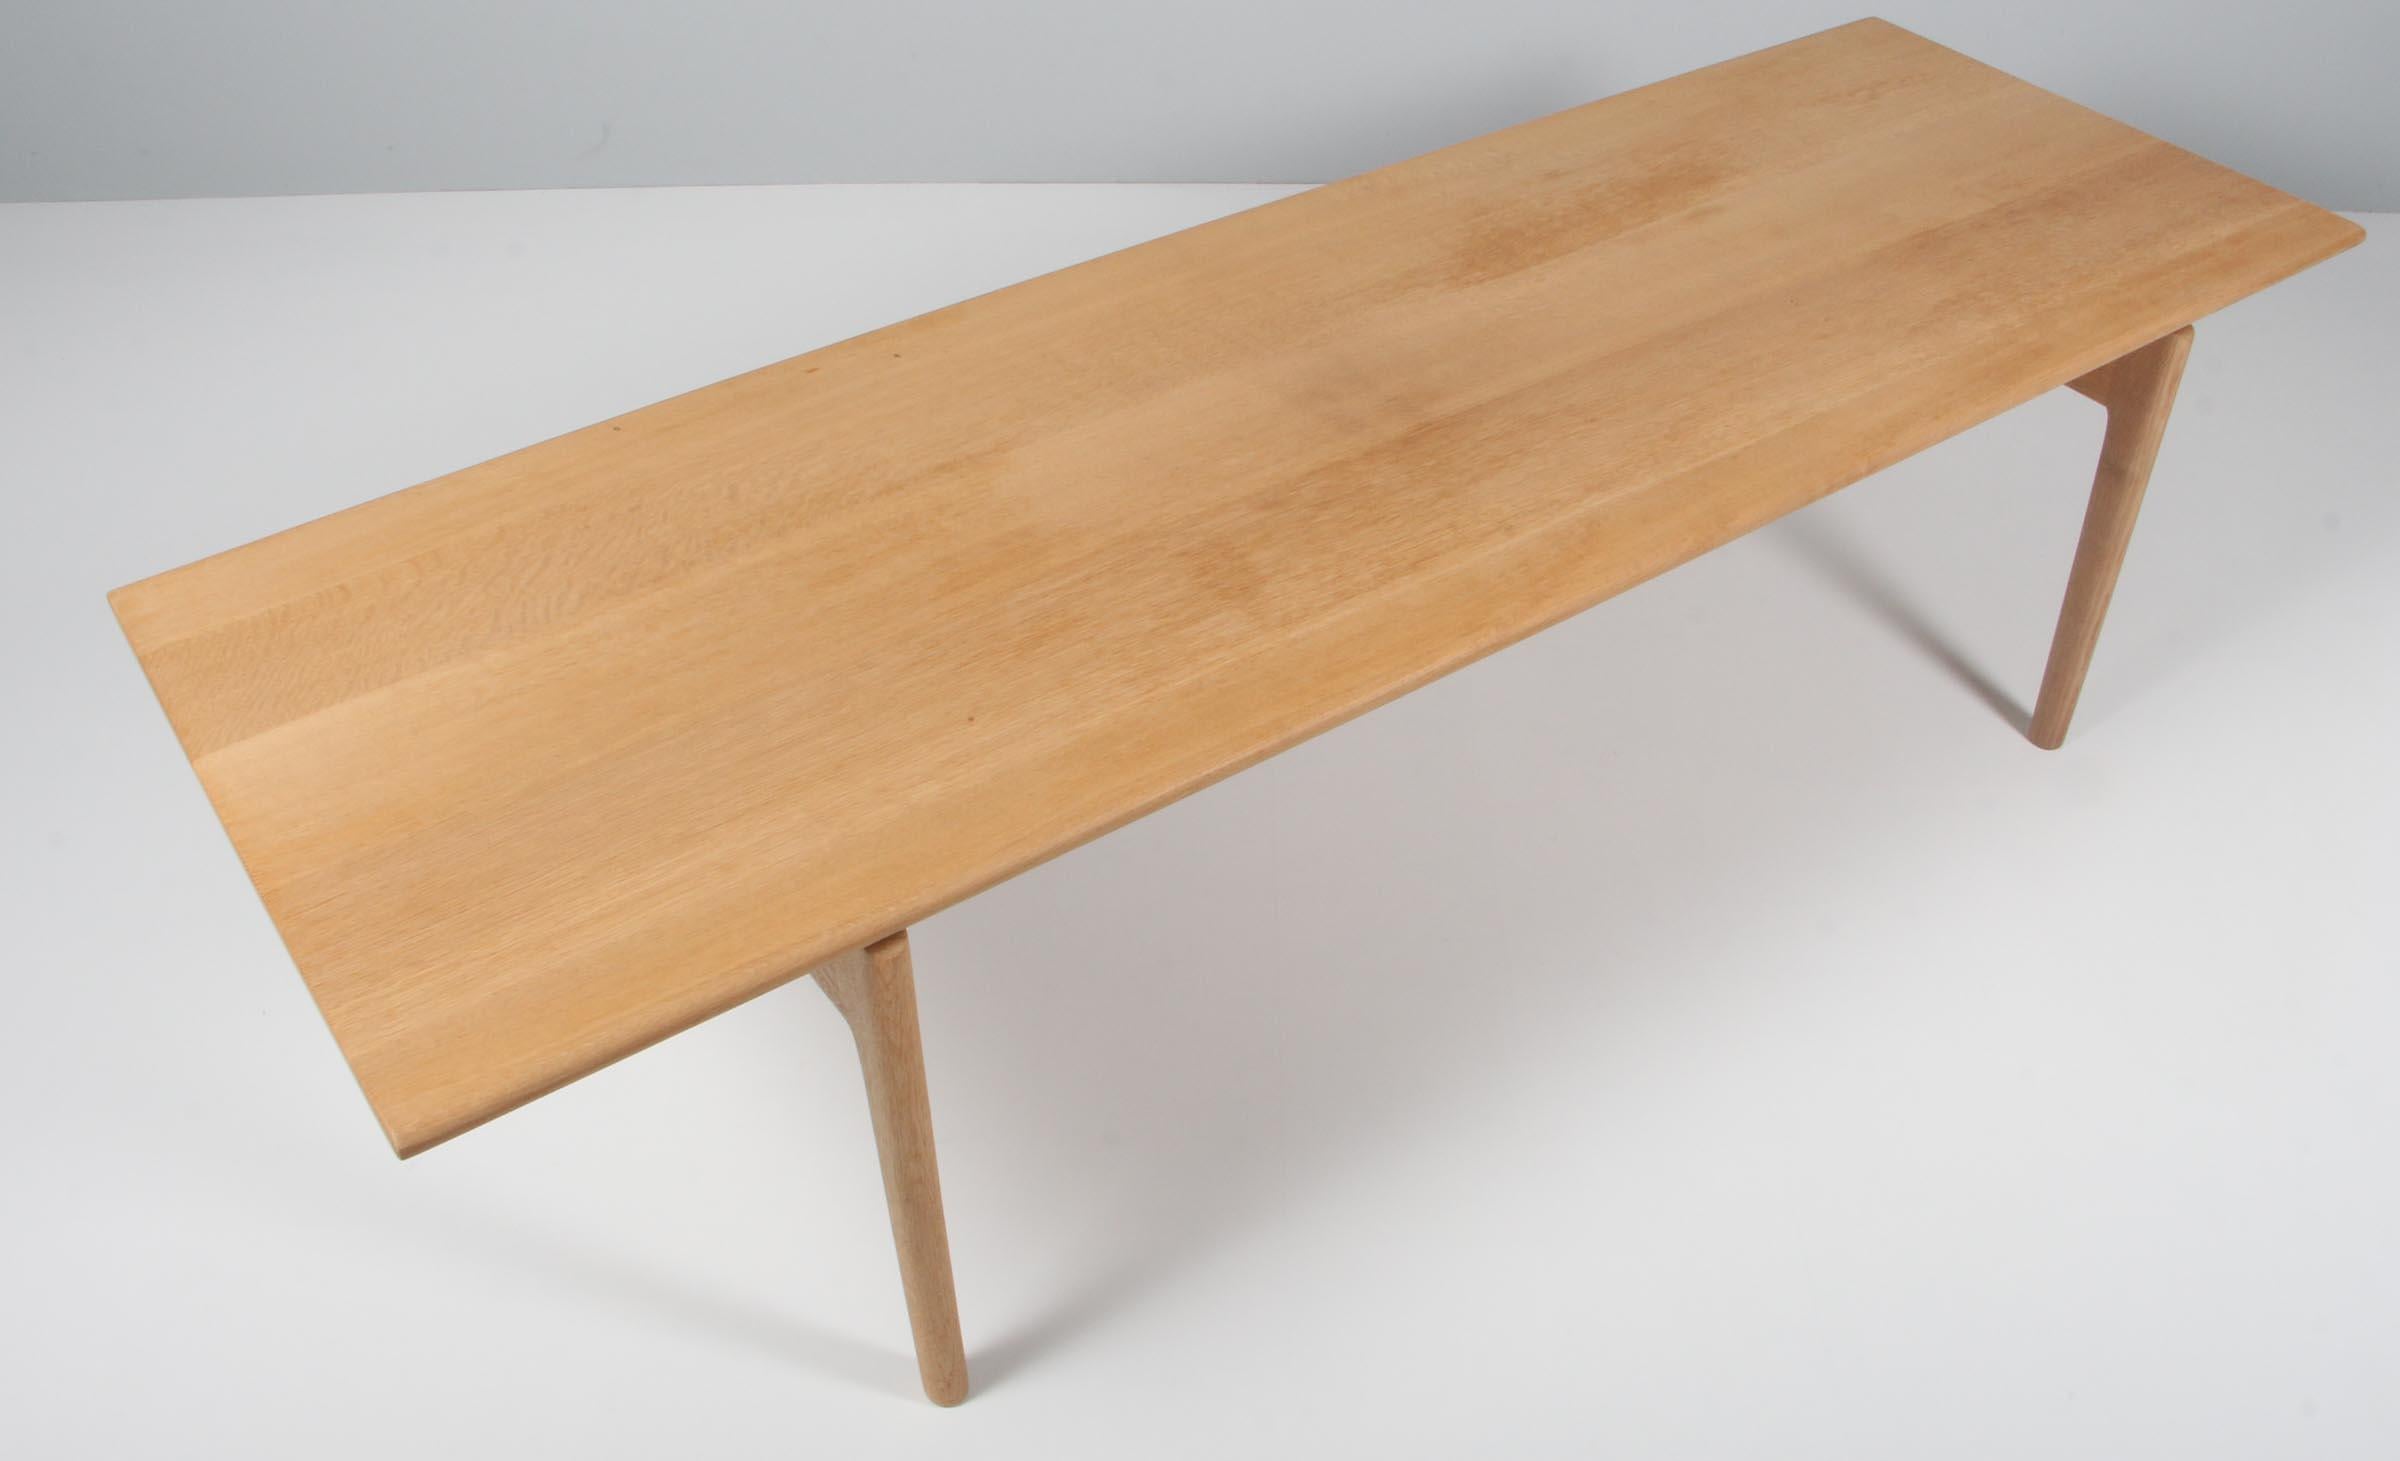 Hans J. Wegner sofa table made in solid soap treated oak.

Model AT15, made by Andreas Tuck.